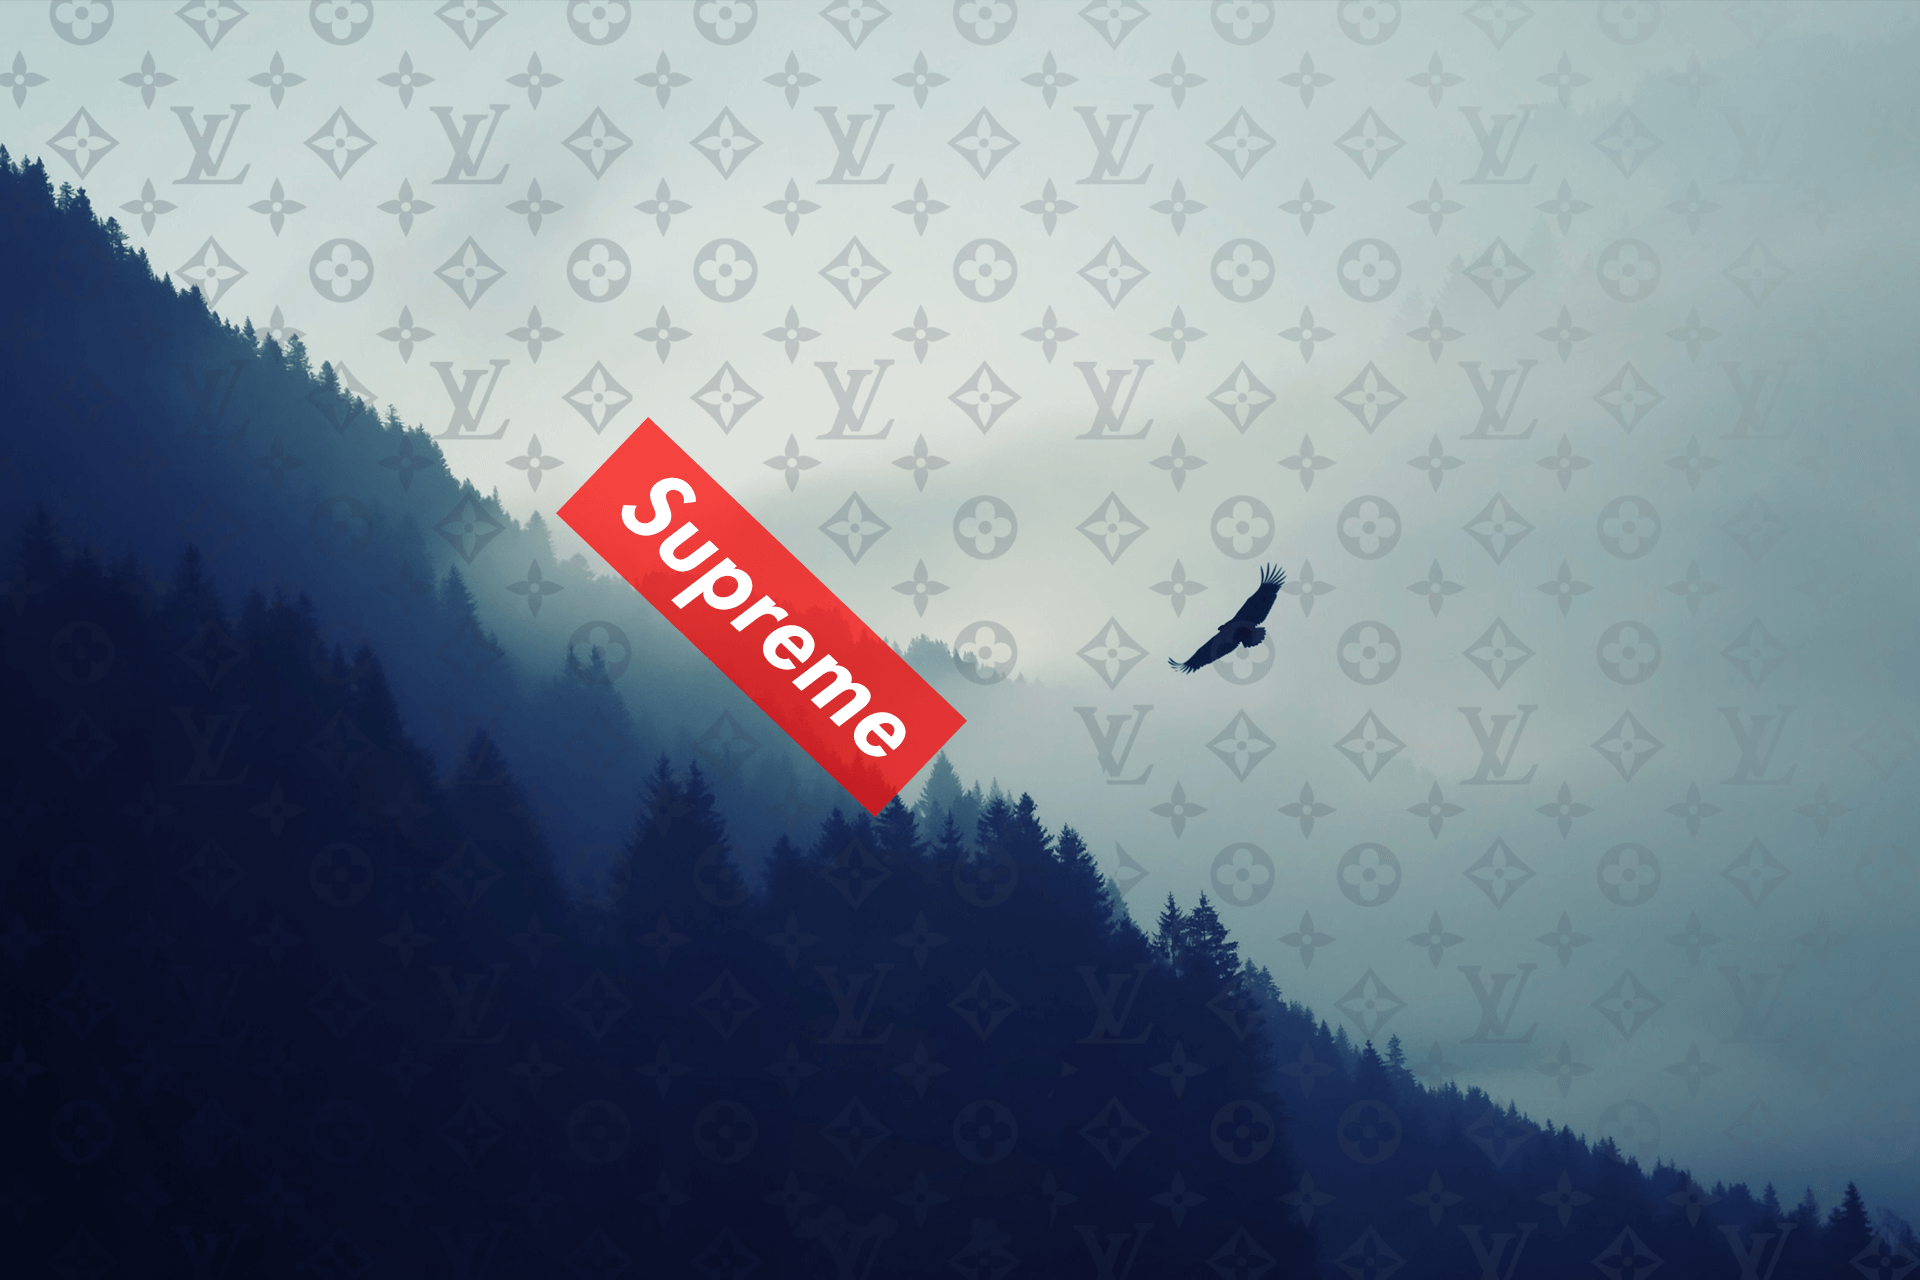 Supreme LV wallpaper by Kwaczygg - Download on ZEDGE™